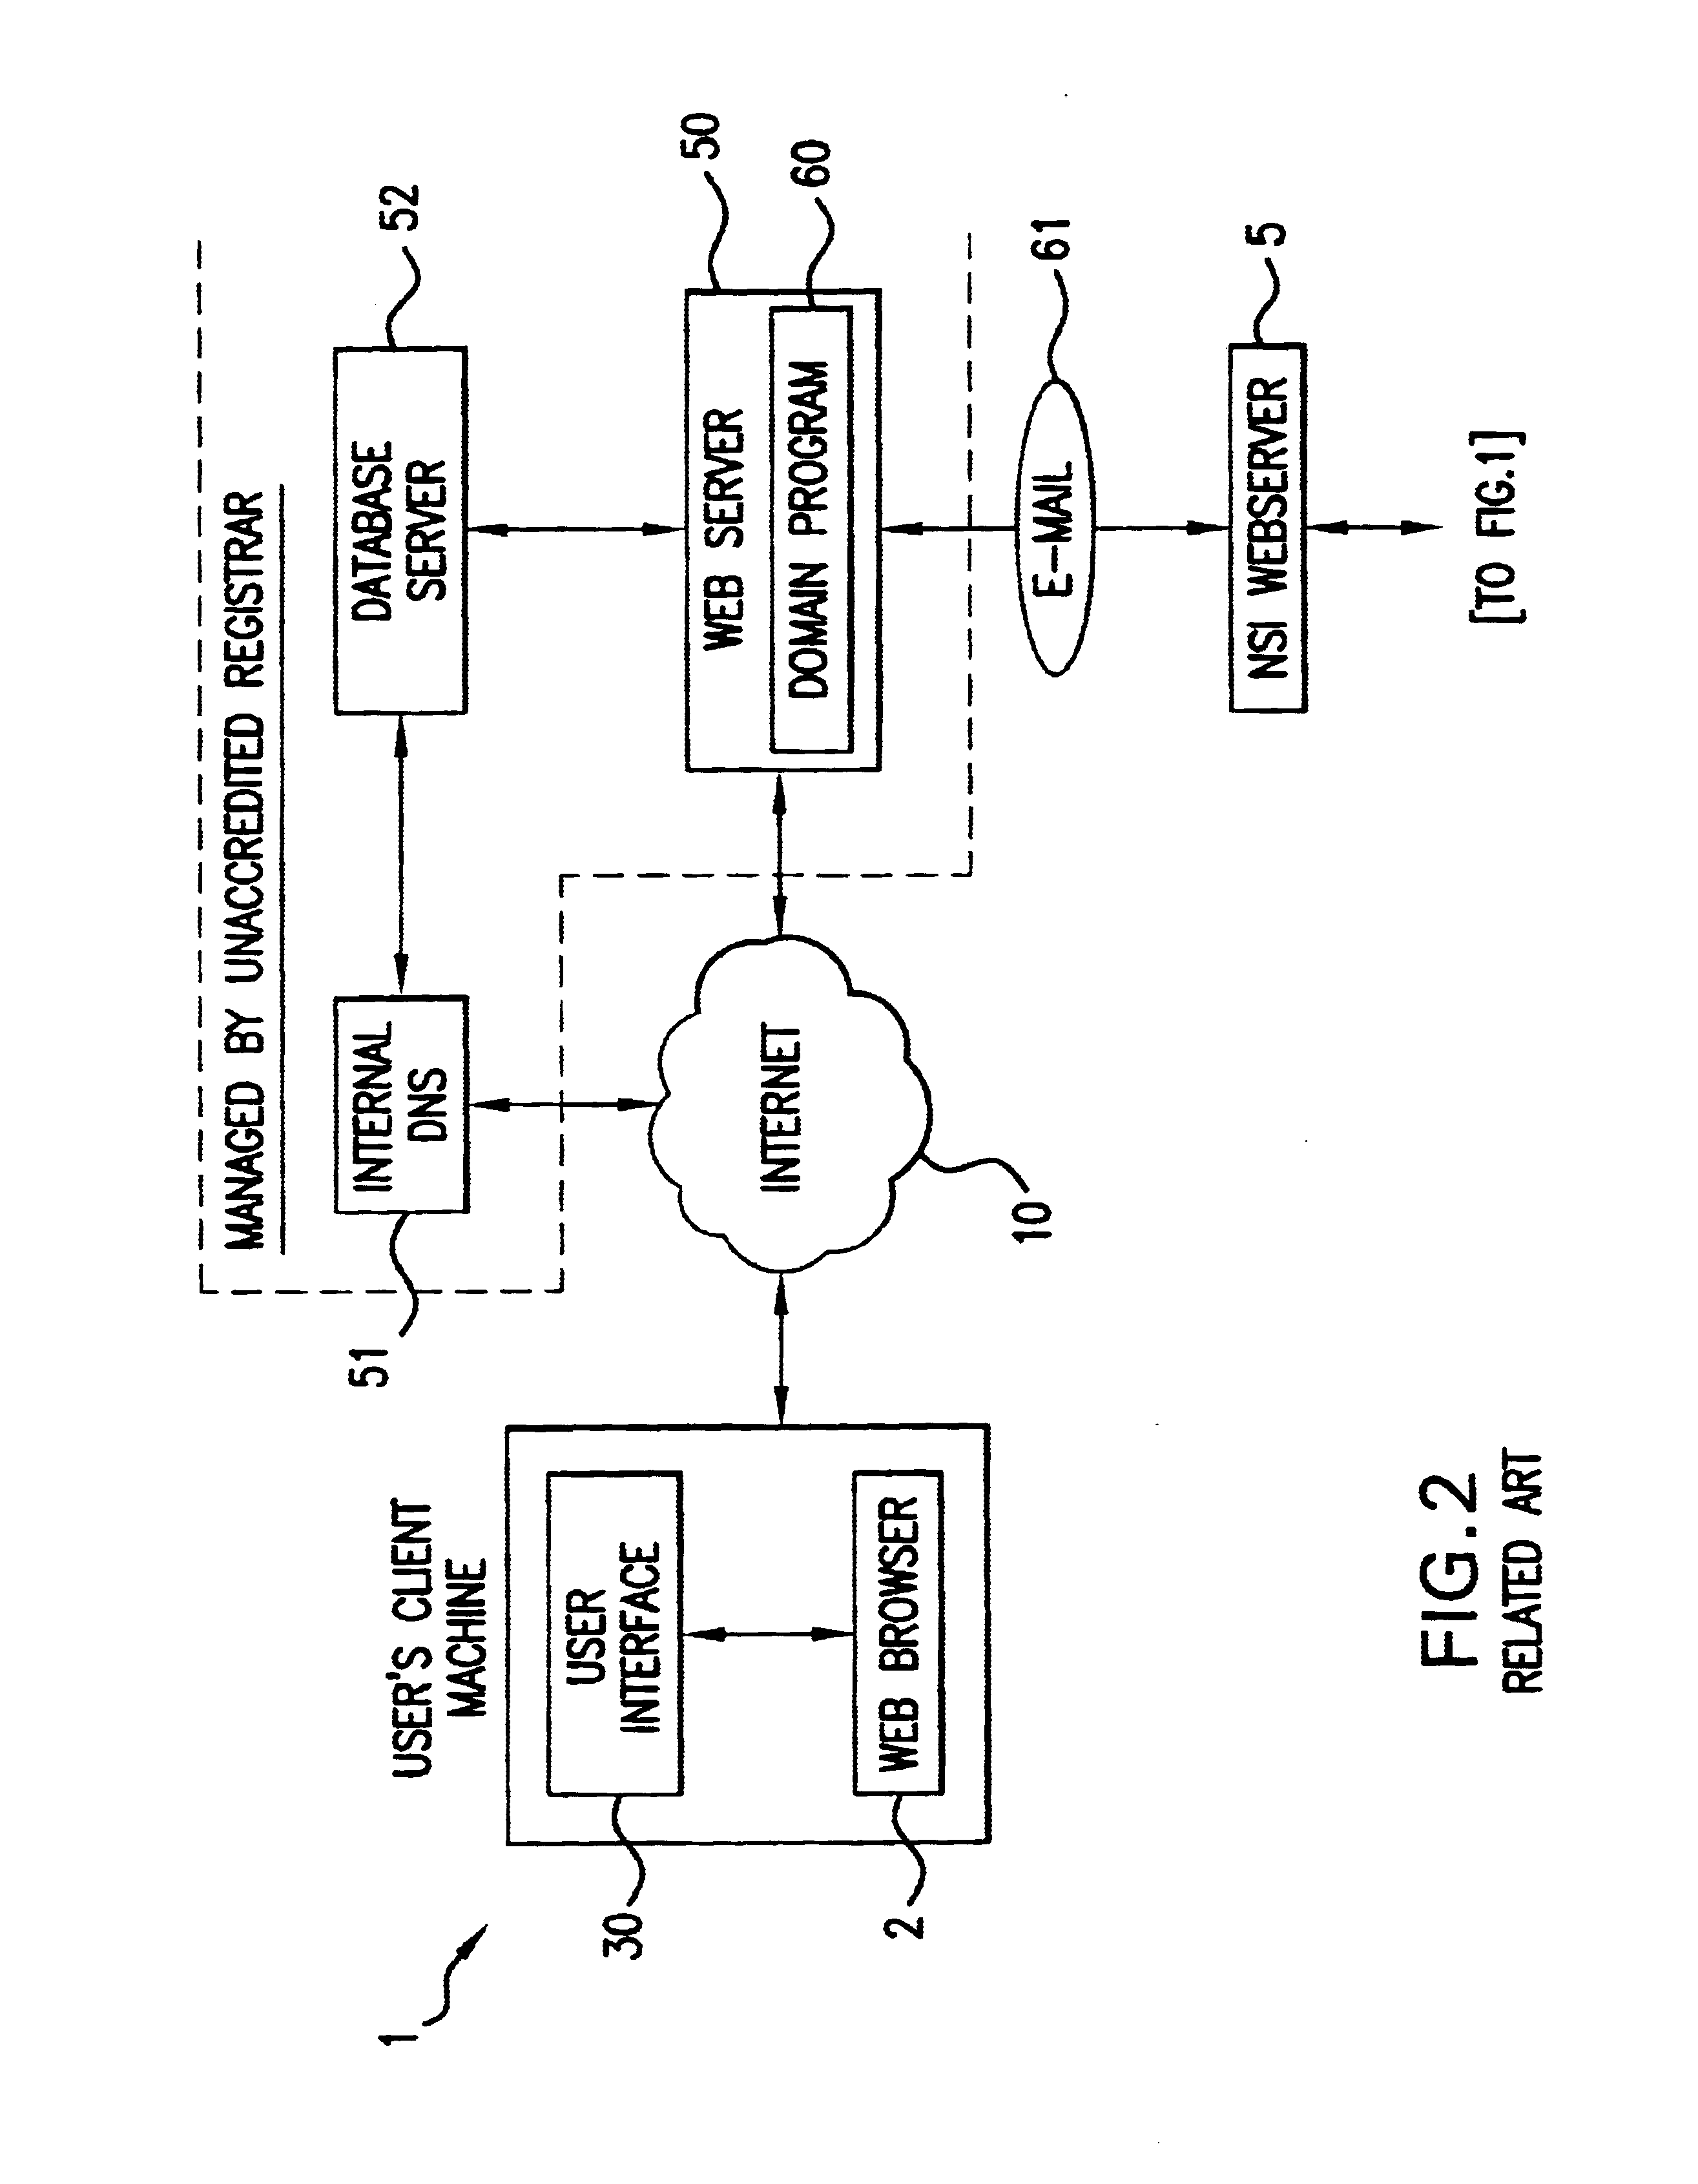 Domain manager and method of use